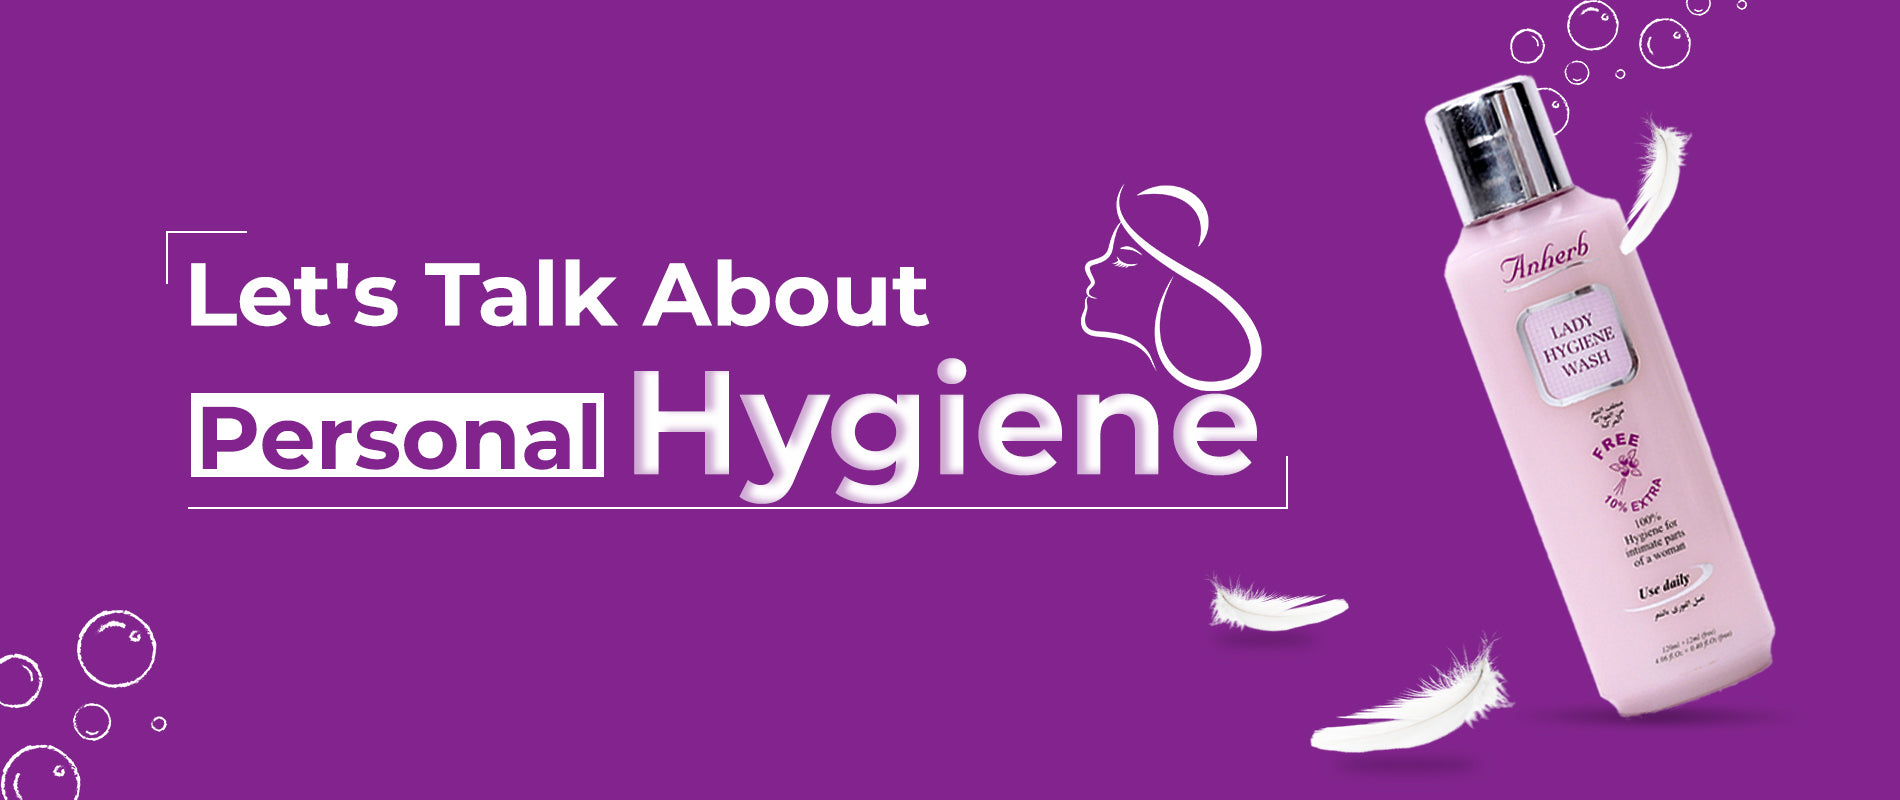 Let's Talk About Personal Hygiene